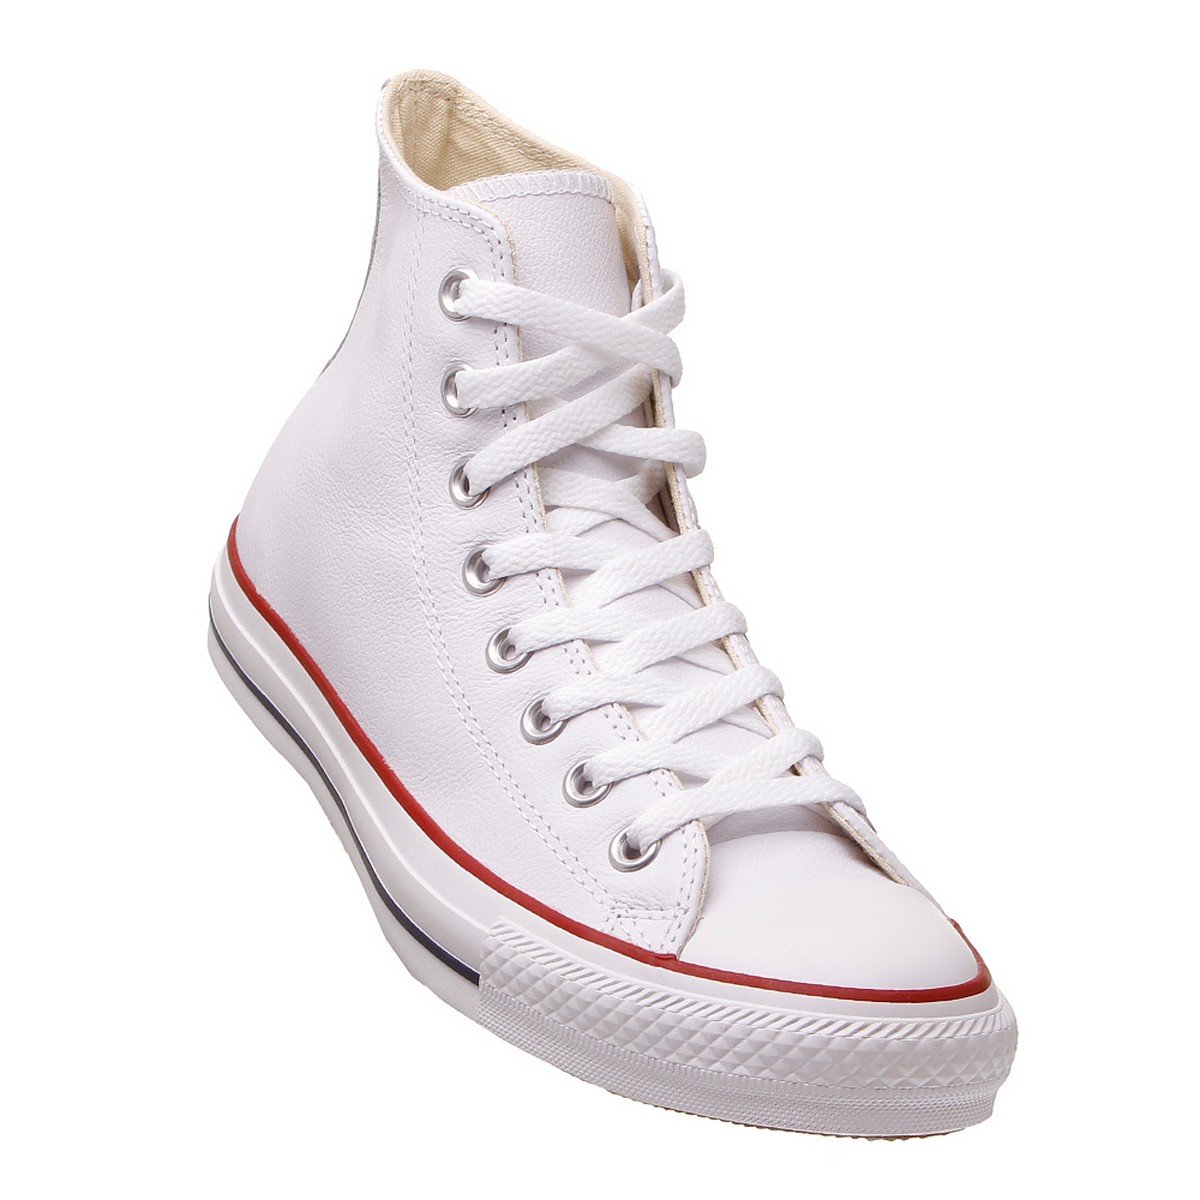 CHUCK TAYLOR ALL STAR LEATHER 